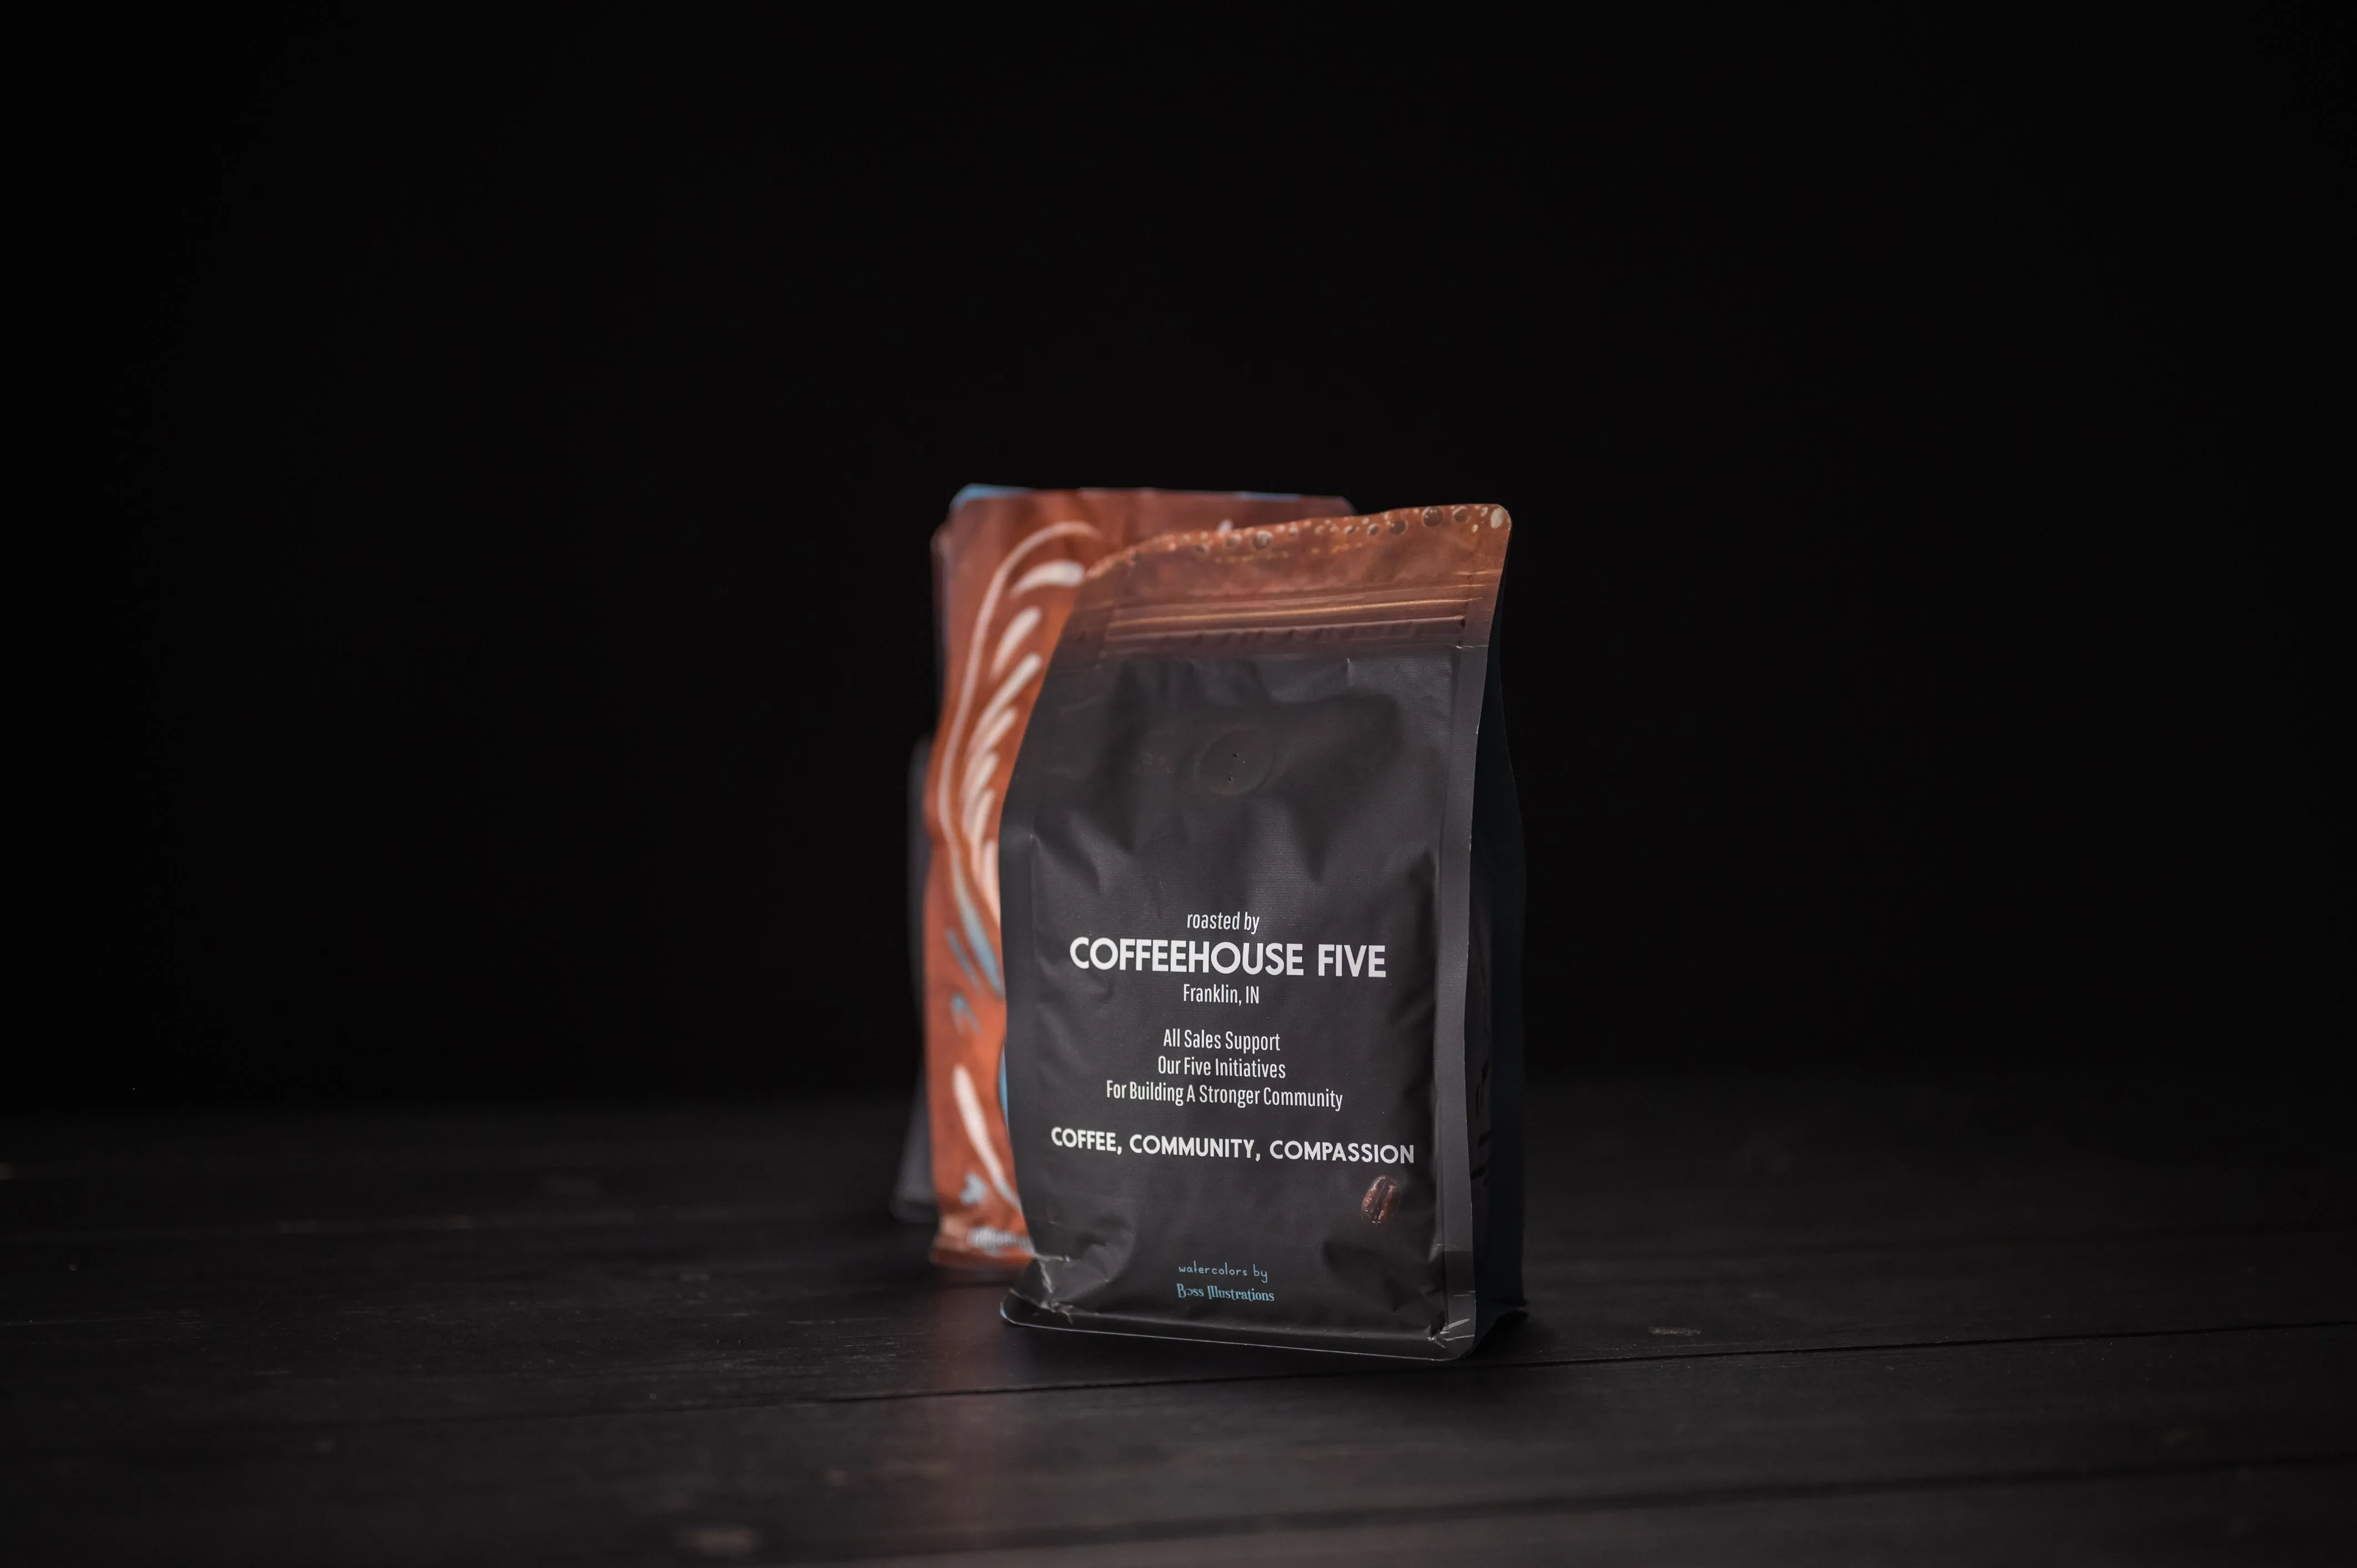 Sealed bag of Coffeehouse Five coffee on a dark wooden surface against a black background.